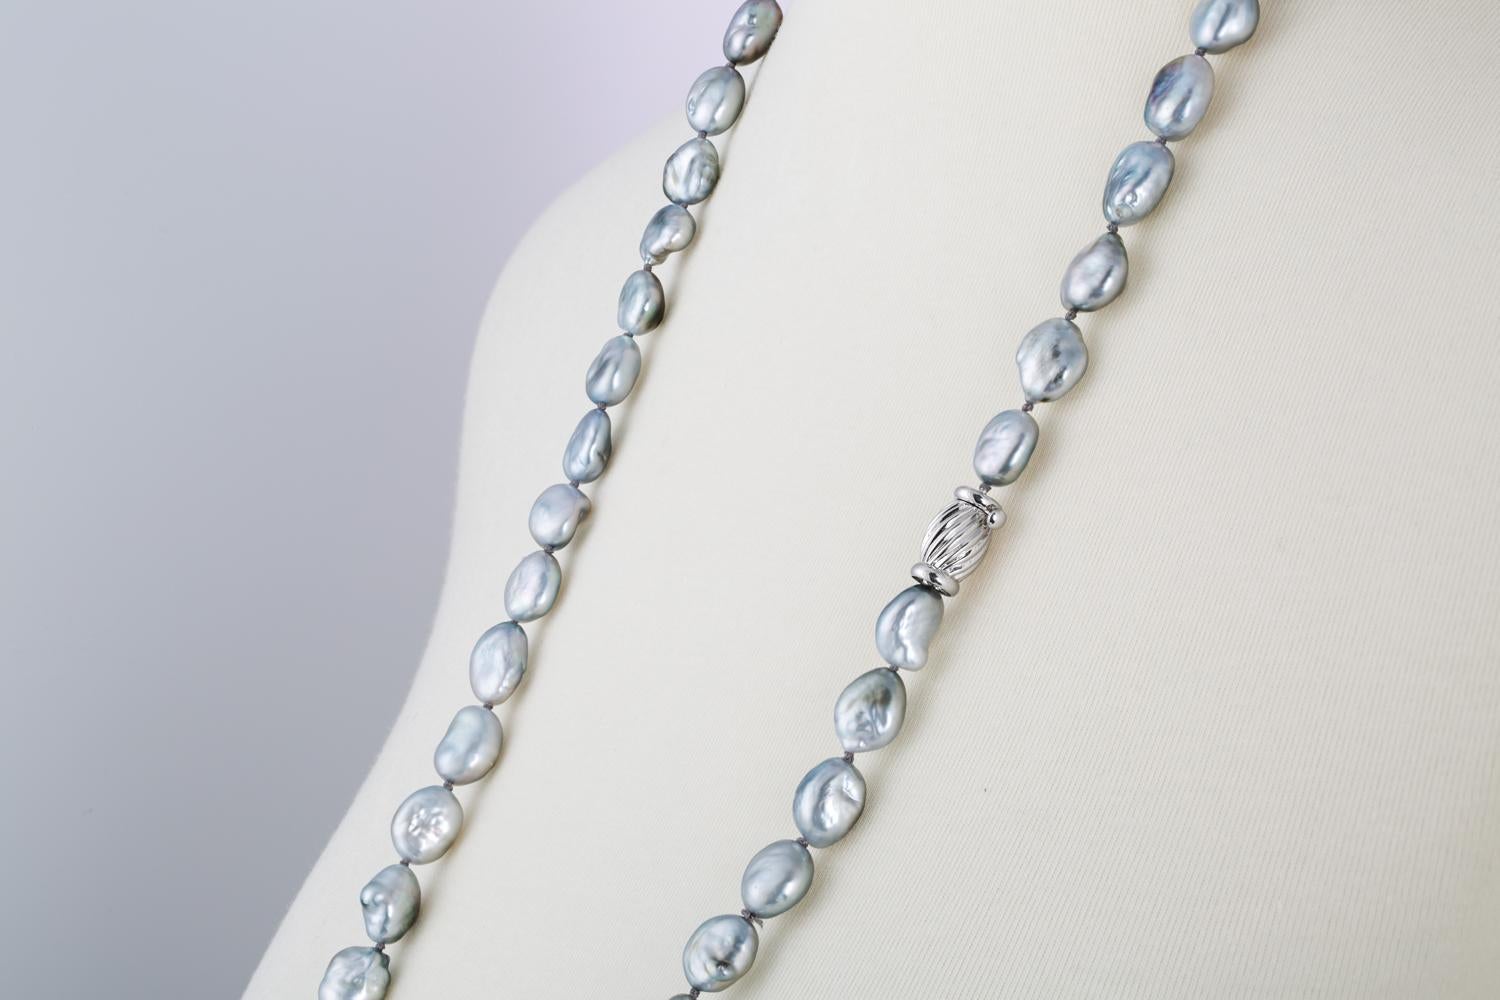 This double-length necklace features baroque shaped South Sea Tahitian cultured pearls measuring 10x11mm. 
The pearls are strung with knots on a 14 karat white barrel clasp. 
The organic shapes of these lustrous pearls are expertly matched.
Their